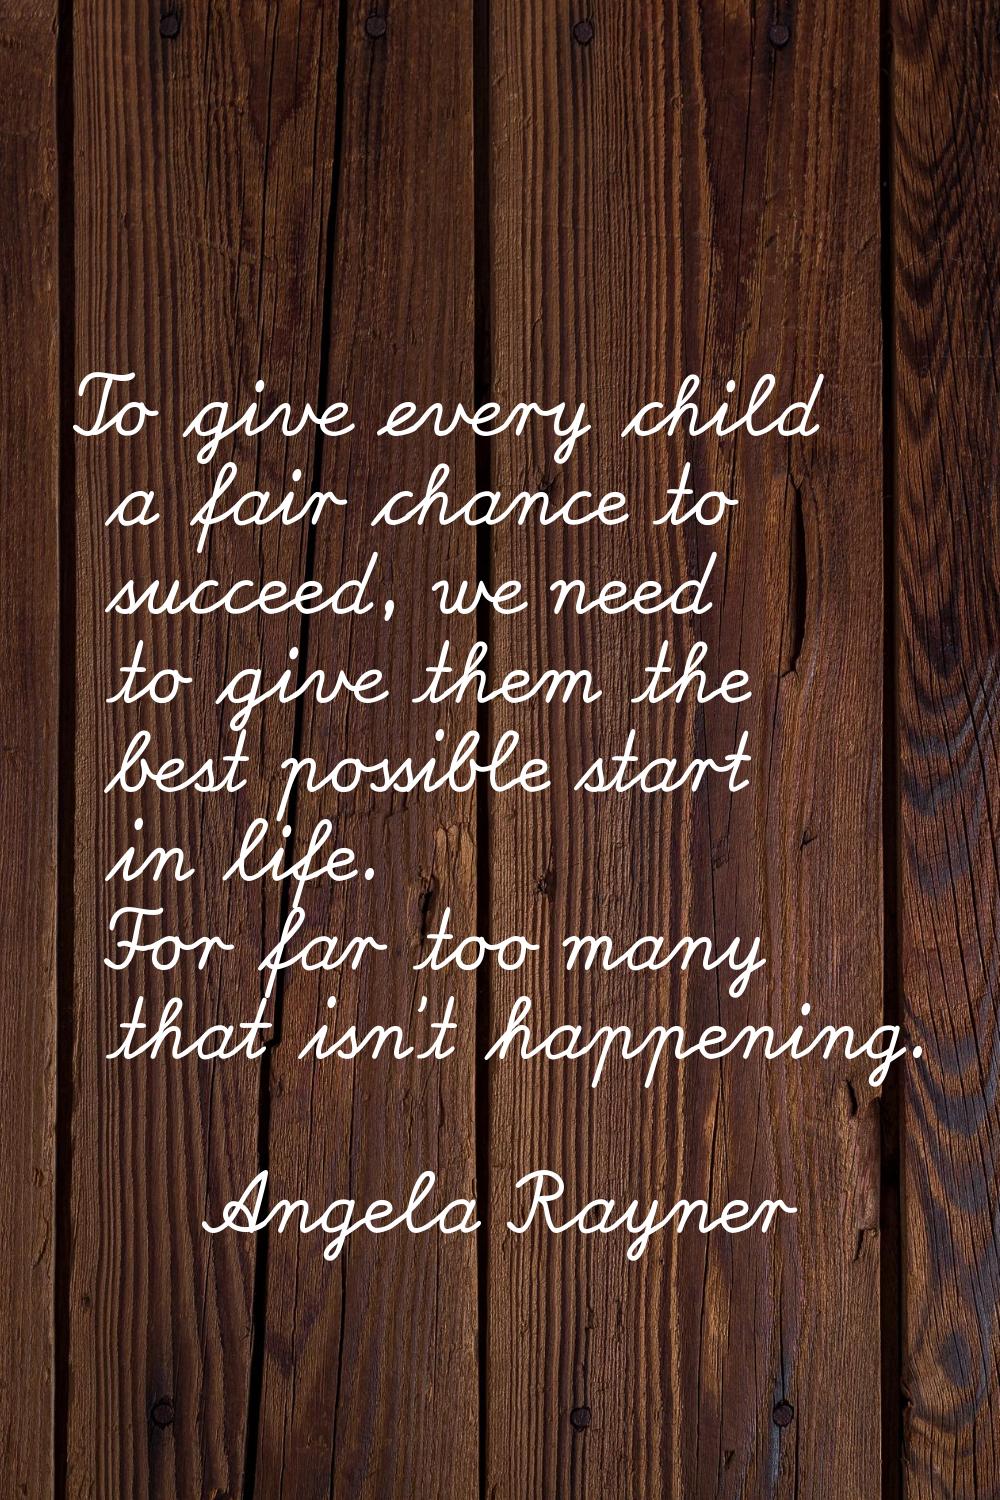 To give every child a fair chance to succeed, we need to give them the best possible start in life.